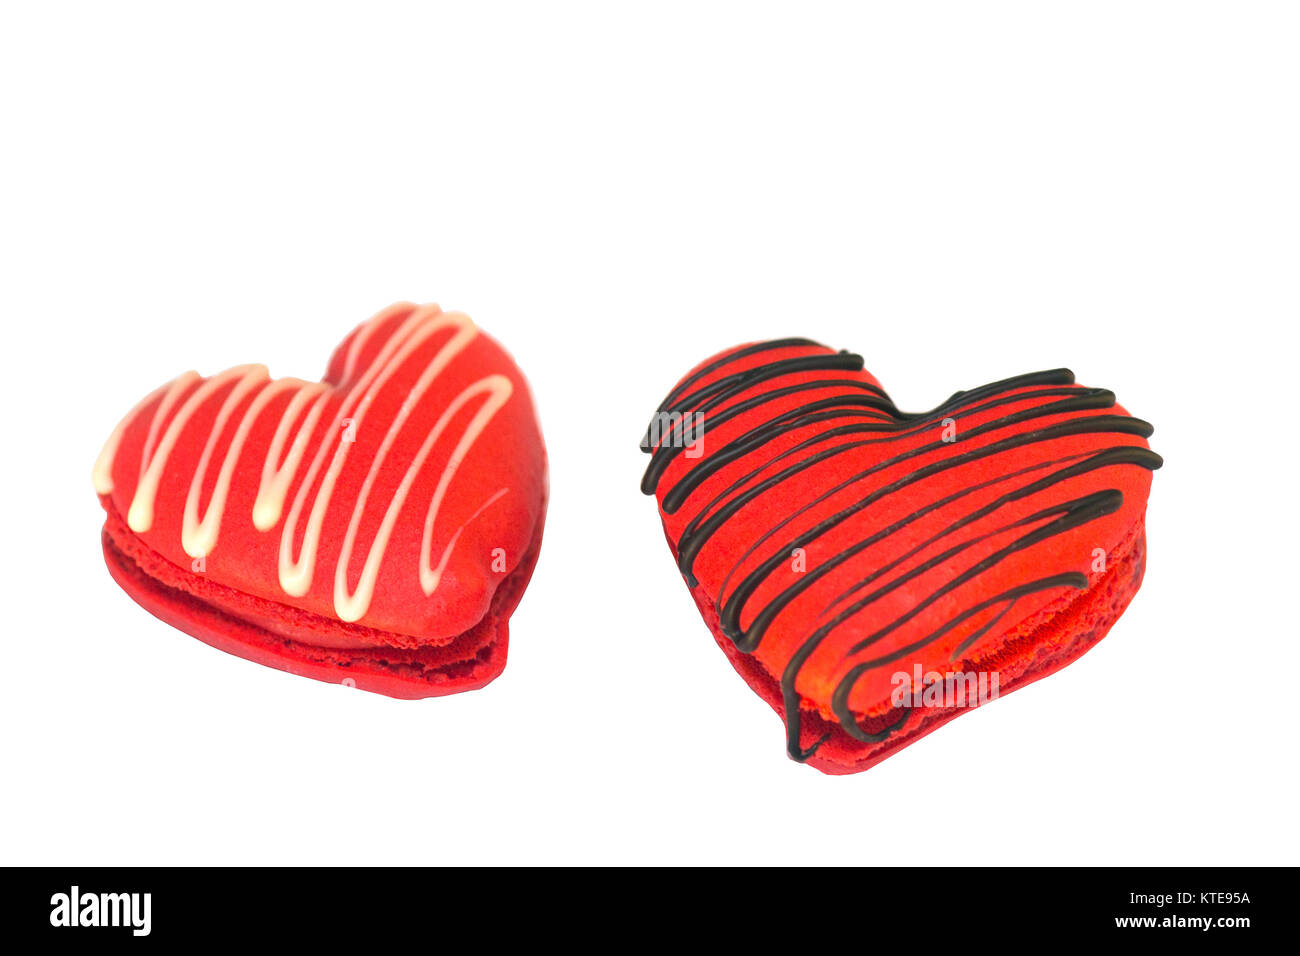 Valentine's Day heart-shaped macarons drizzled with chocolate, on white background Stock Photo